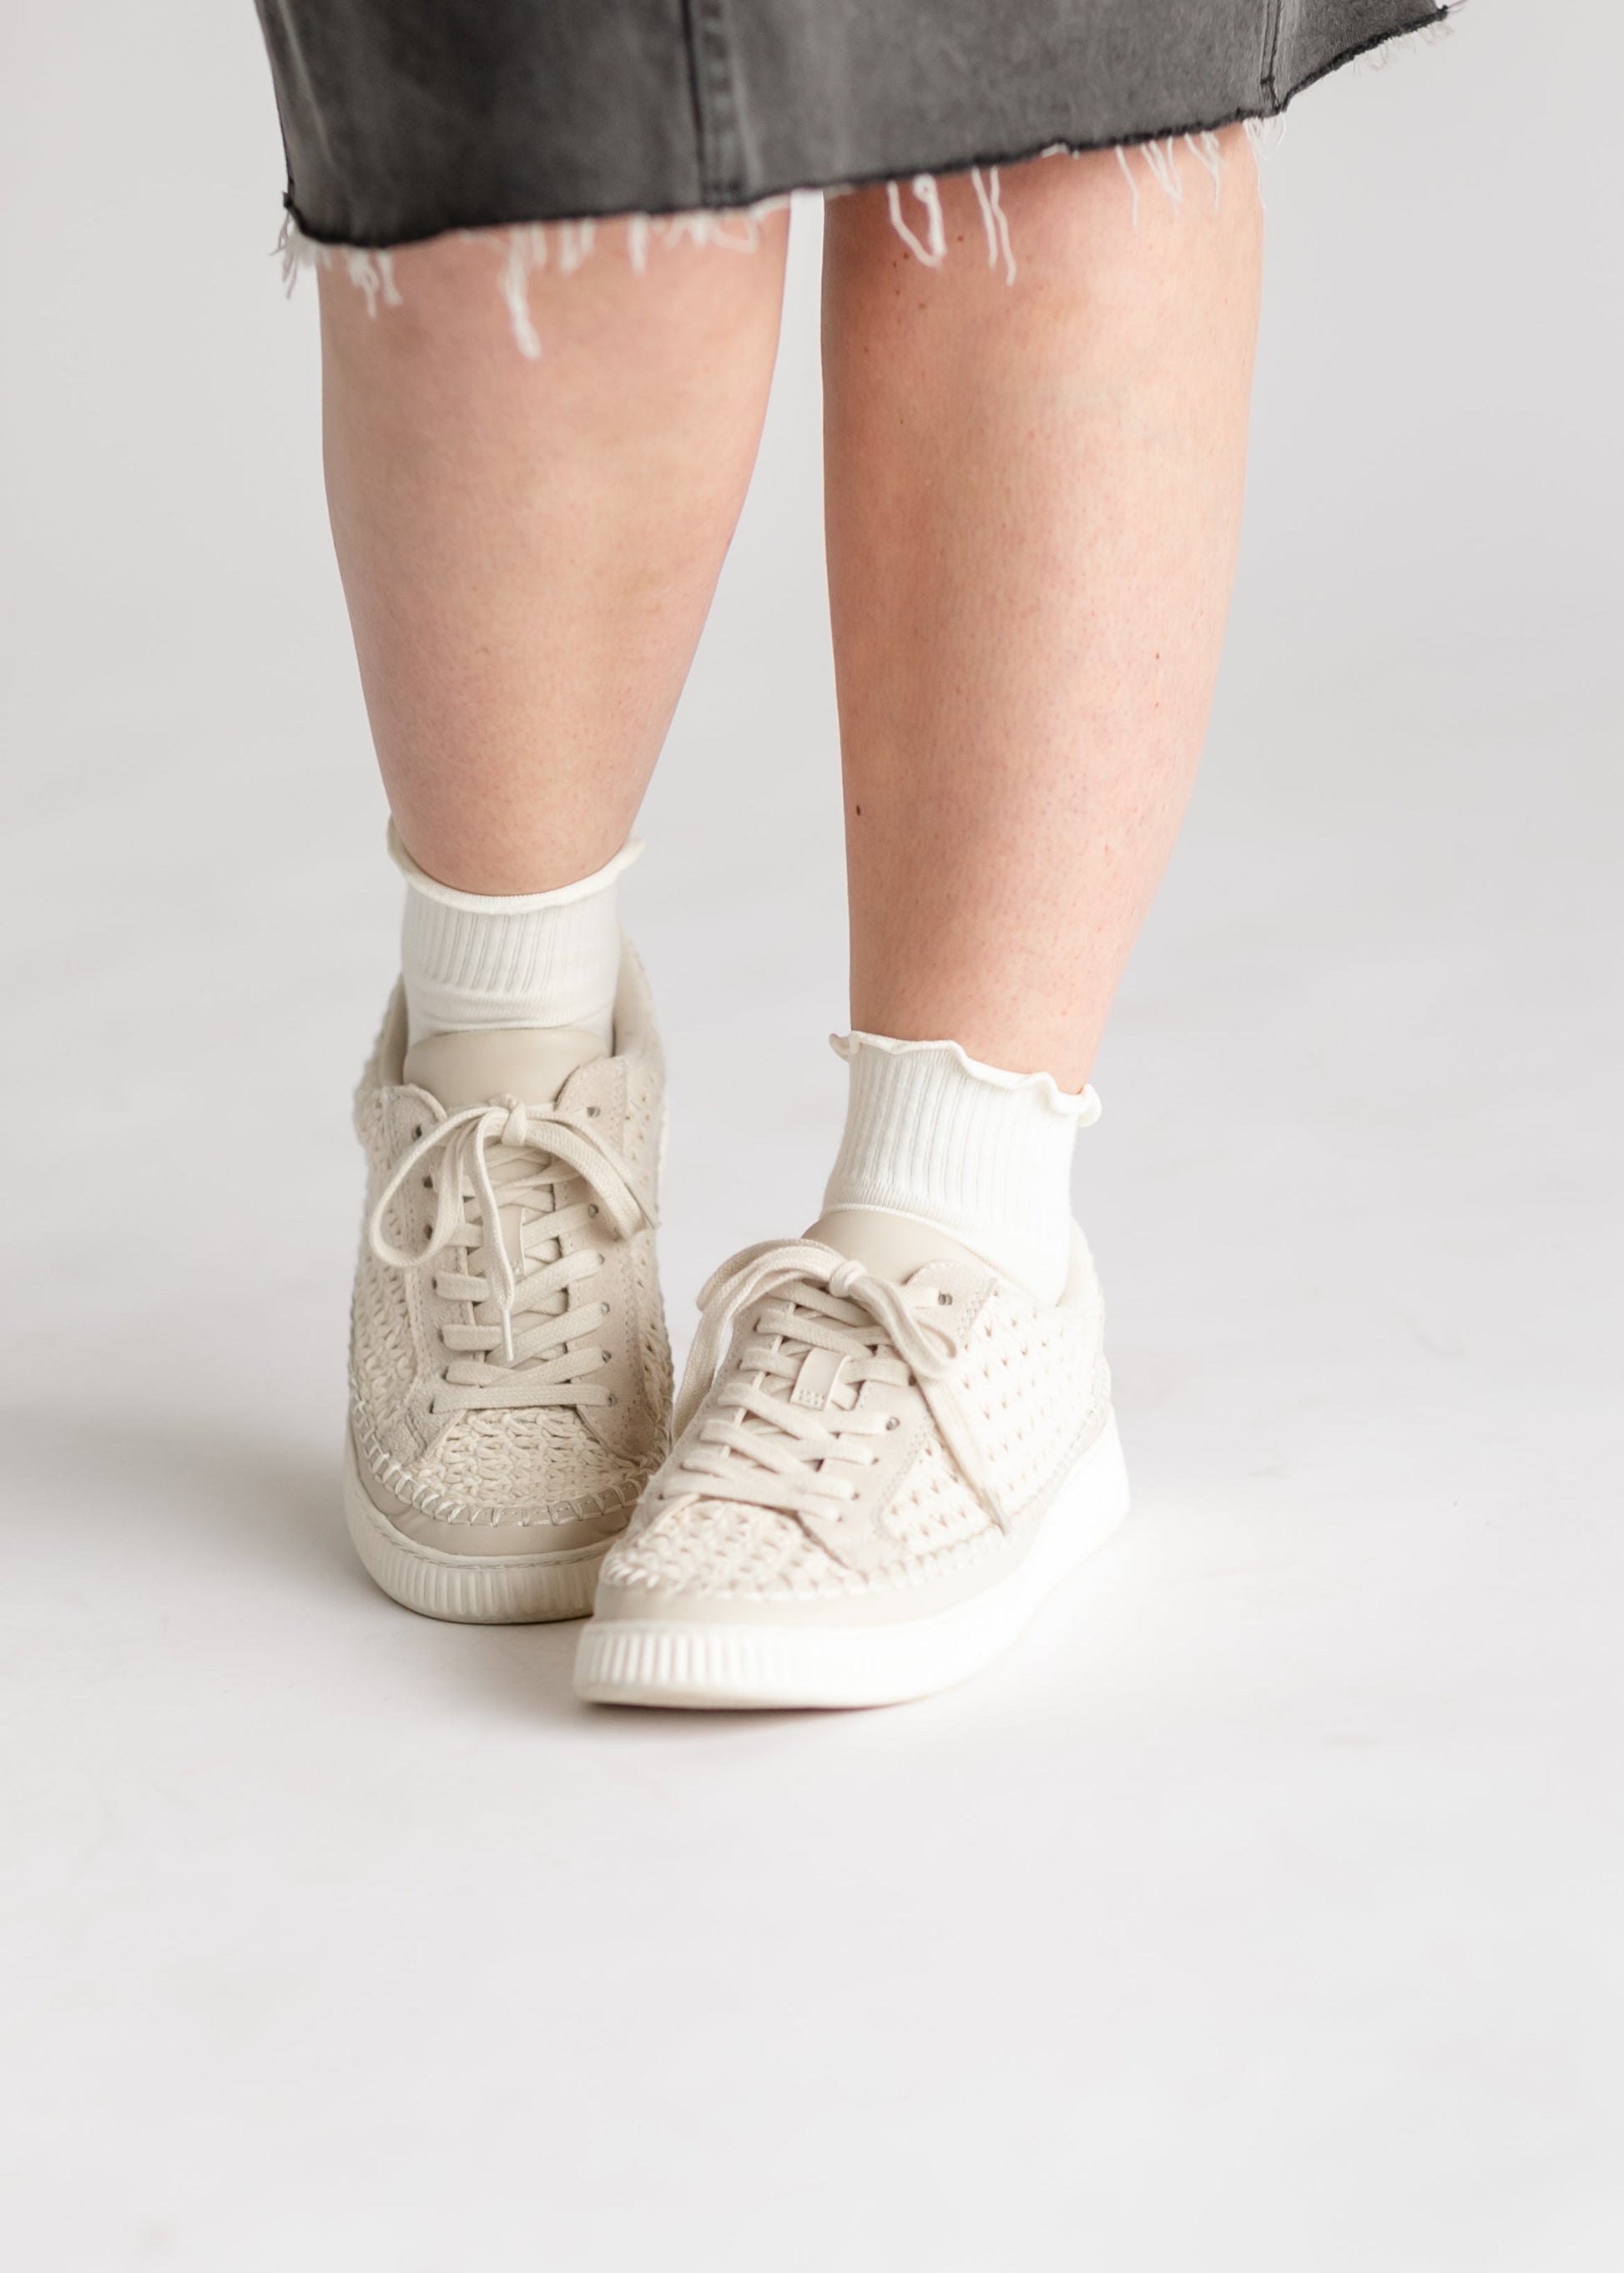 Ruffled Ankle Socks Accessories